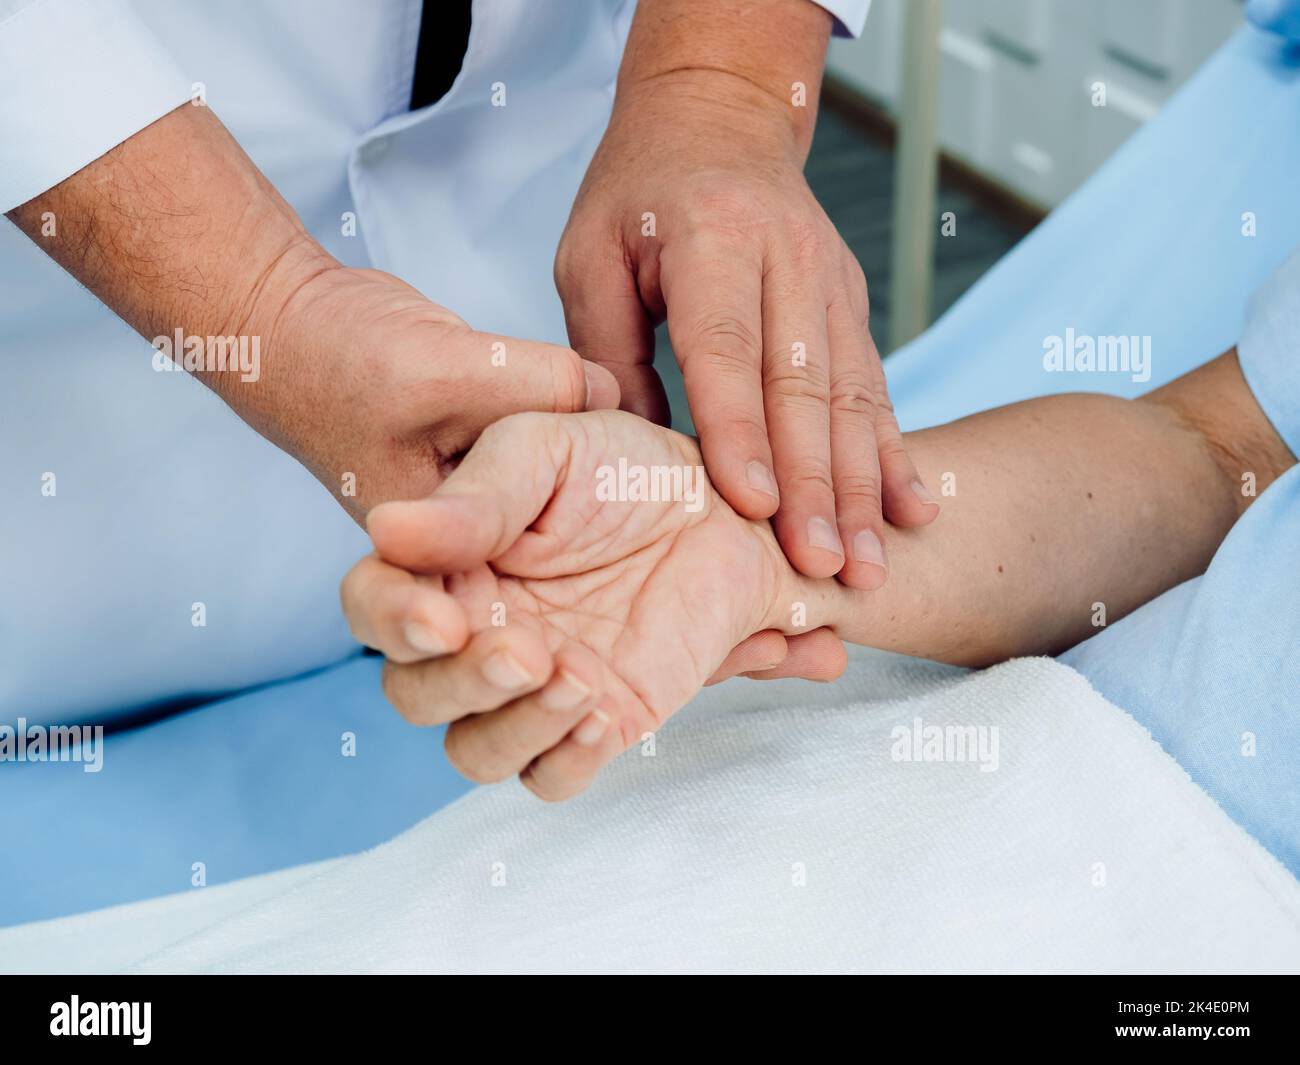 Close up doctor's hand in white lab coat holding elderly patient's hand who lying on the bed for checking examining heartbeat pulse by fingers in reco Stock Photo